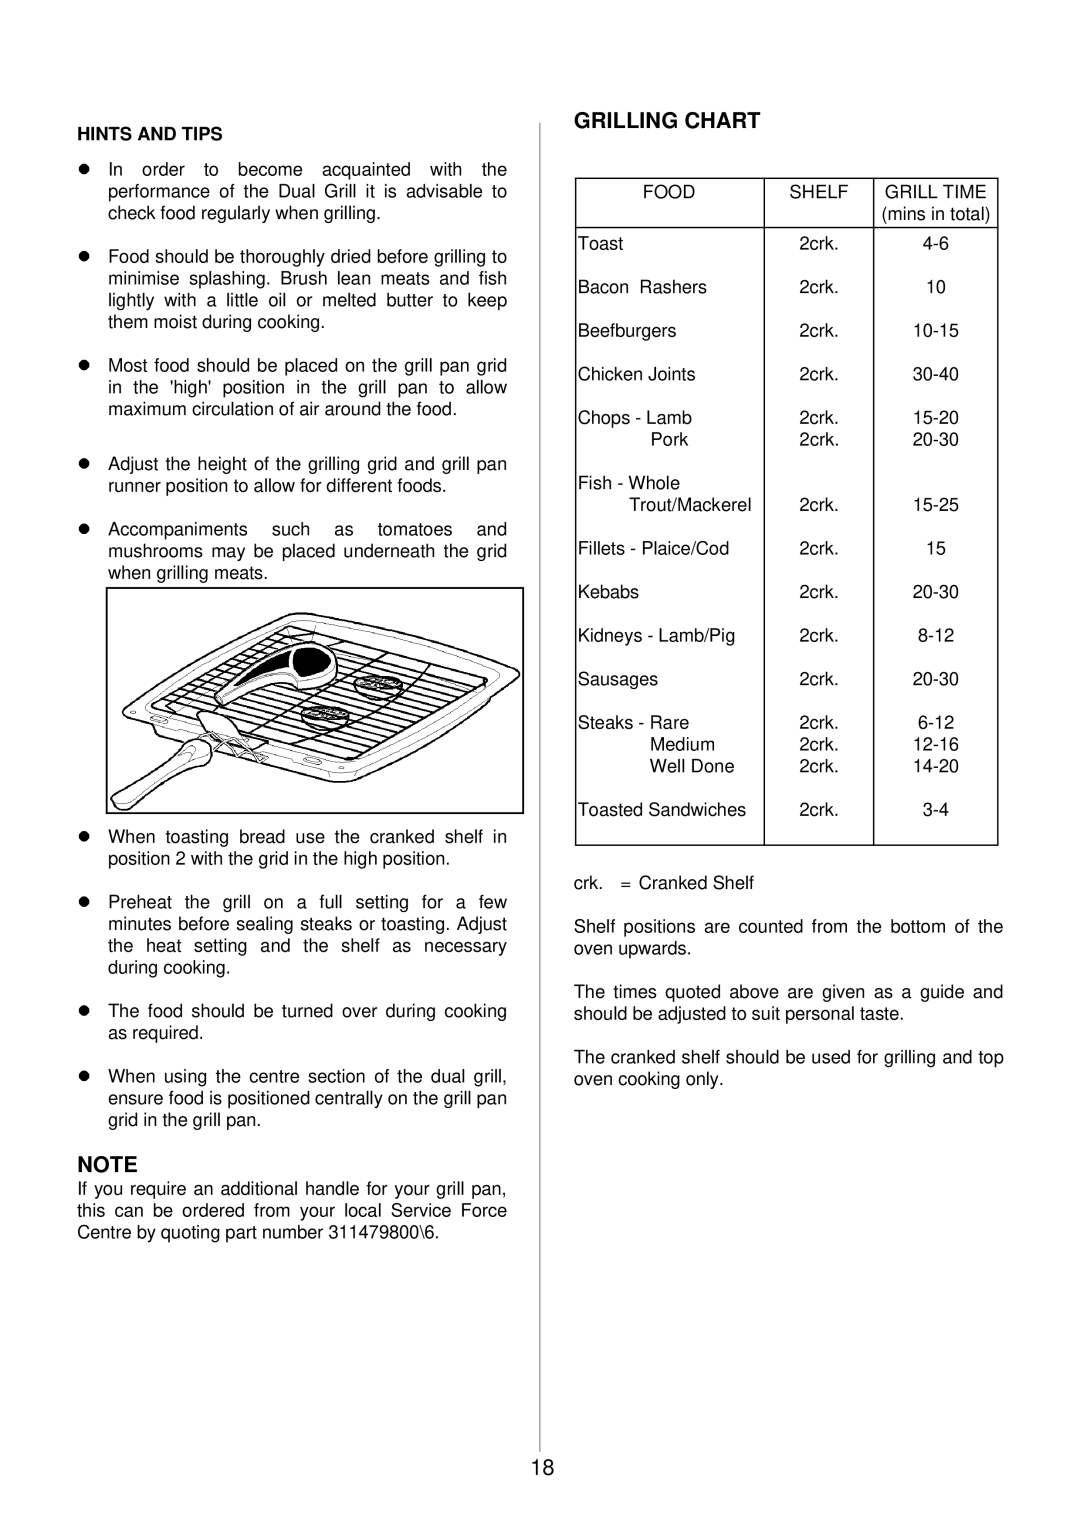 Electrolux 985 manual Grilling Chart, Hints and Tips 